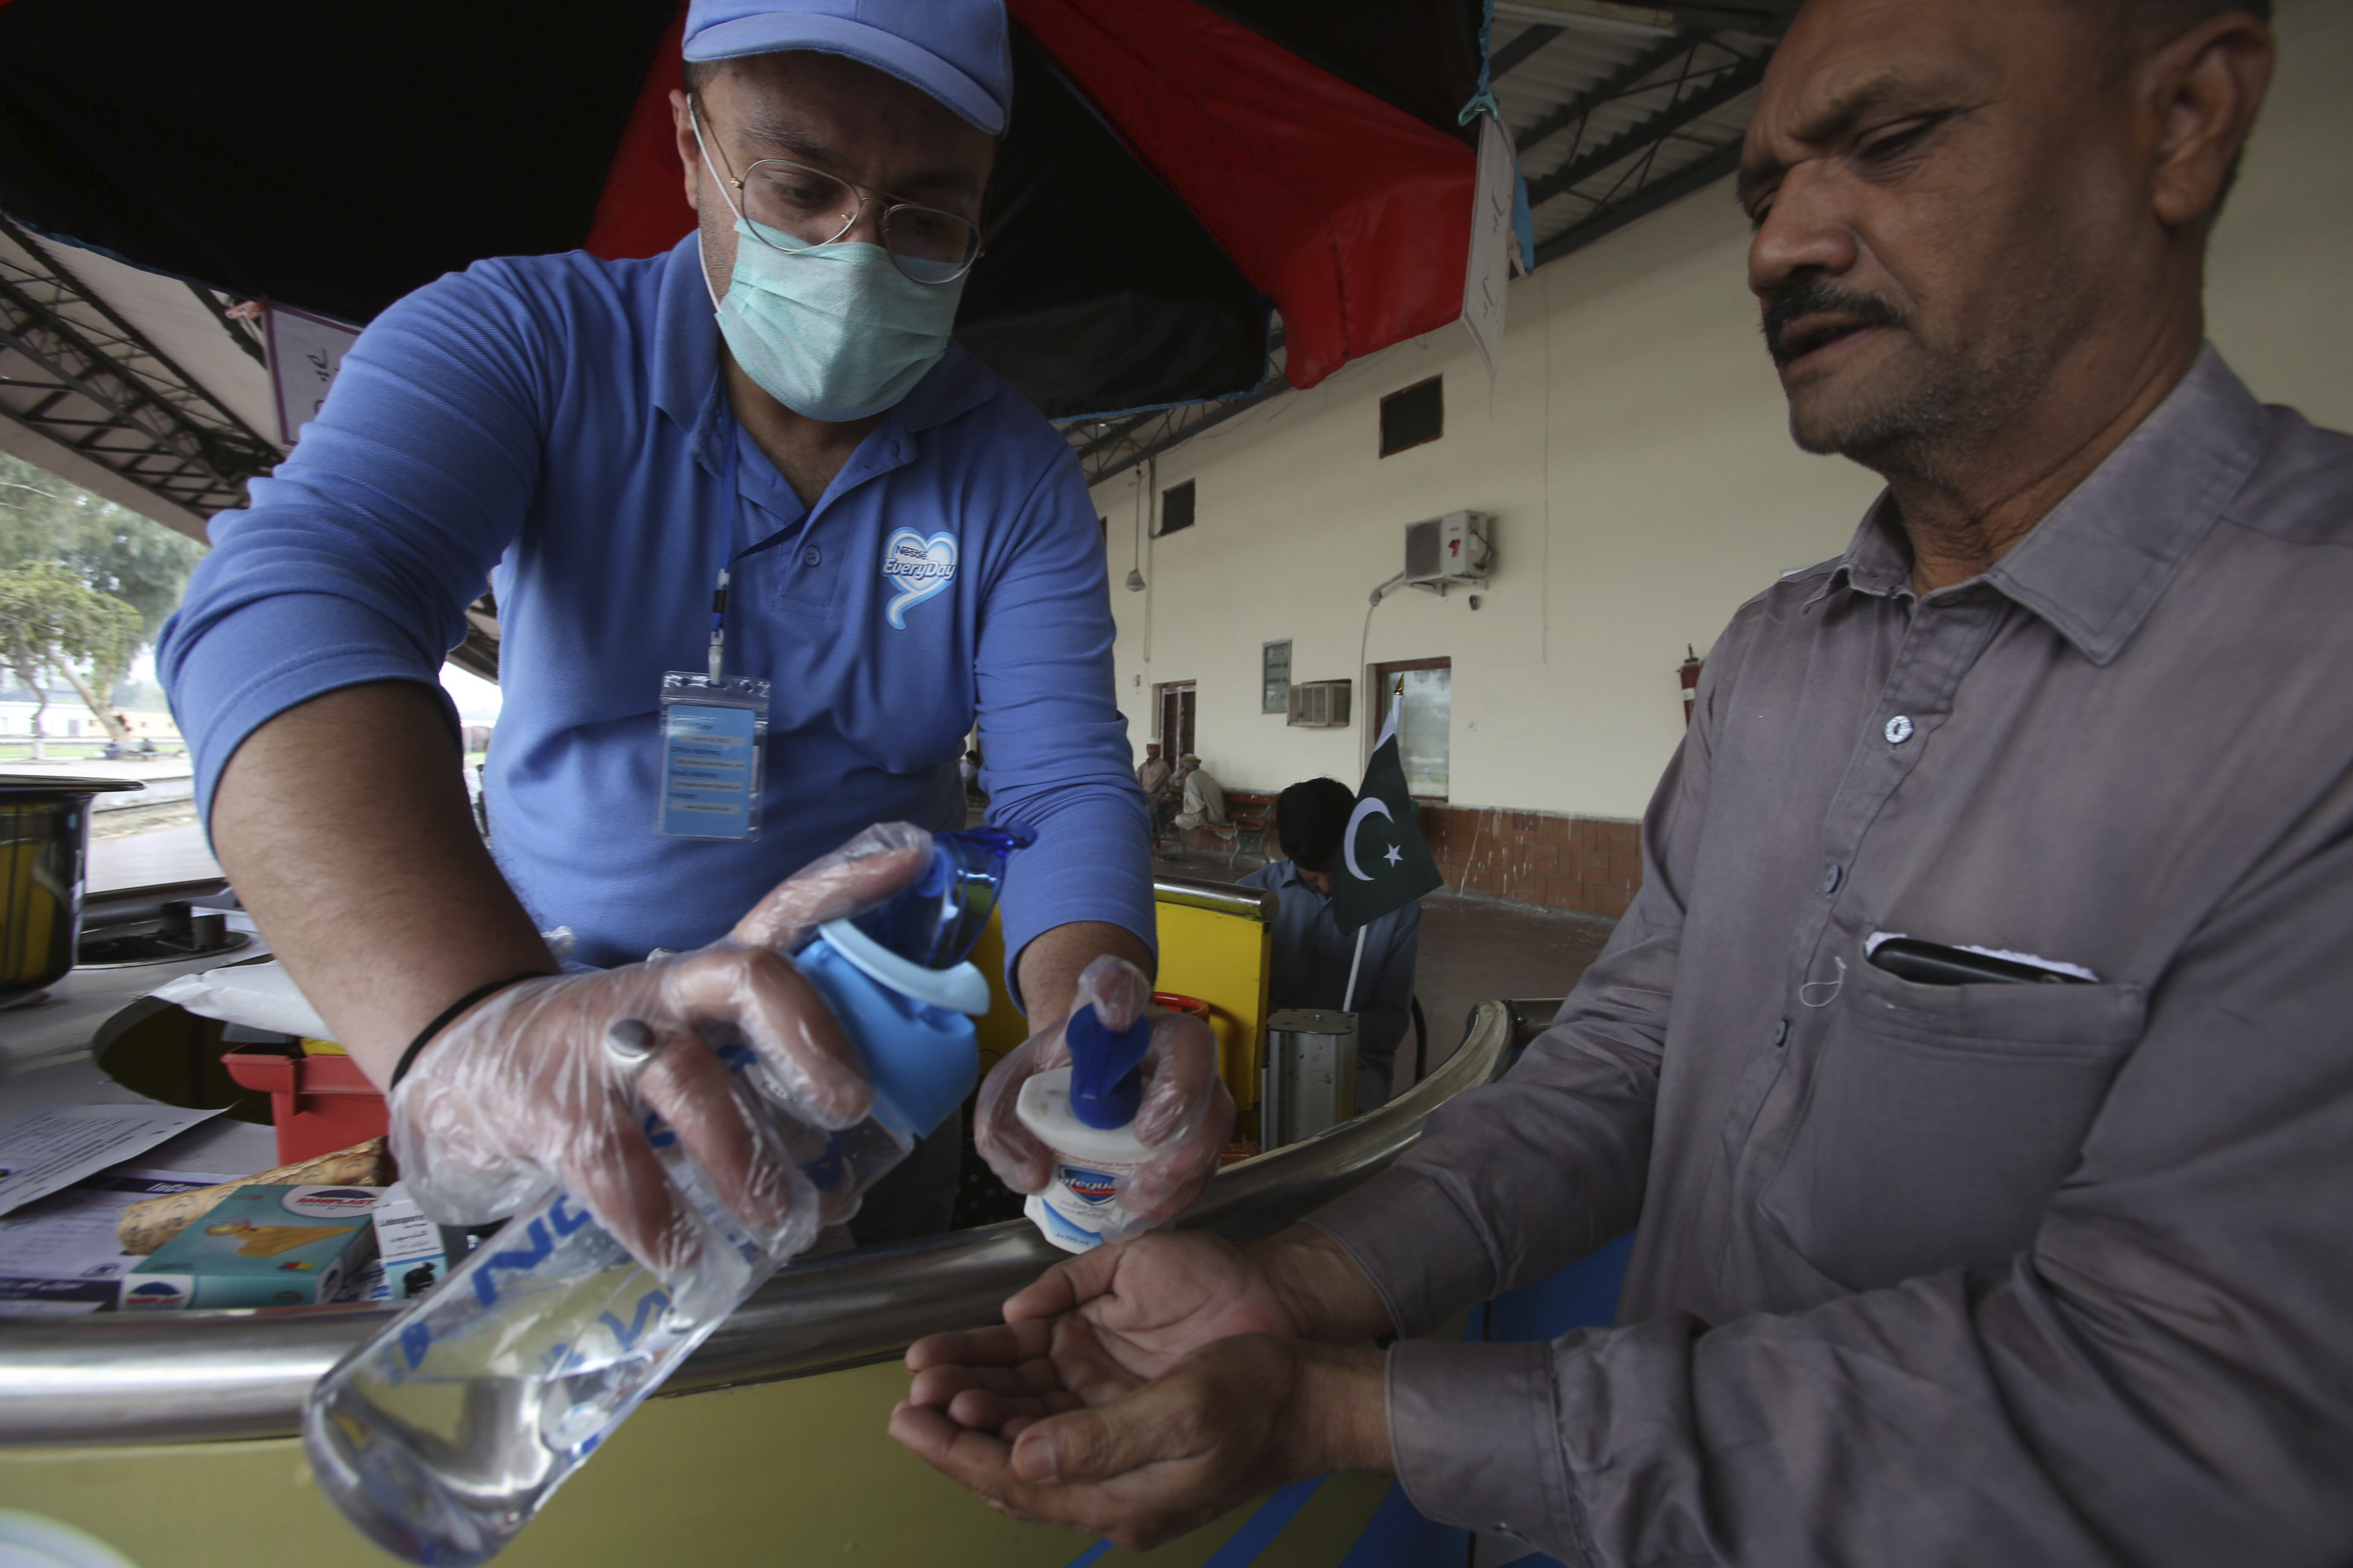 A Pakistani volunteer helps a passenger arriving at a railway station to wash hands as a measure to help prevent the spread of the coronavirus.